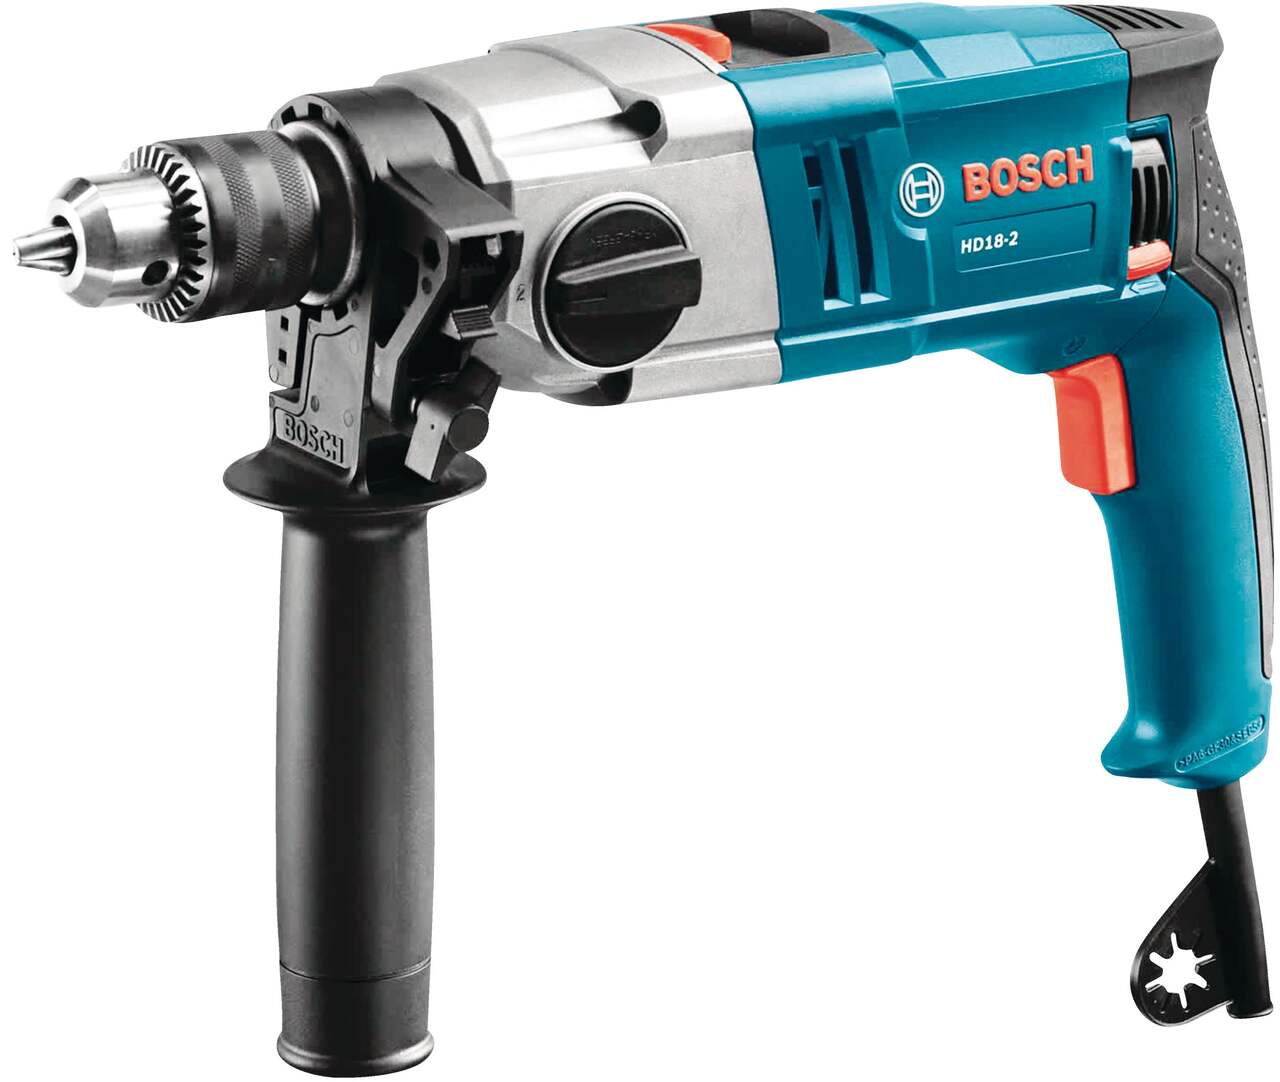 https://media-www.canadiantire.ca/product/fixing/tools/portable-power-tools/0547284/bosch-1-2-hammer-drill-recoded-054-2017--186f9e2d-b952-4b90-bcd1-611008377f60-jpgrendition.jpg?imdensity=1&imwidth=640&impolicy=mZoom